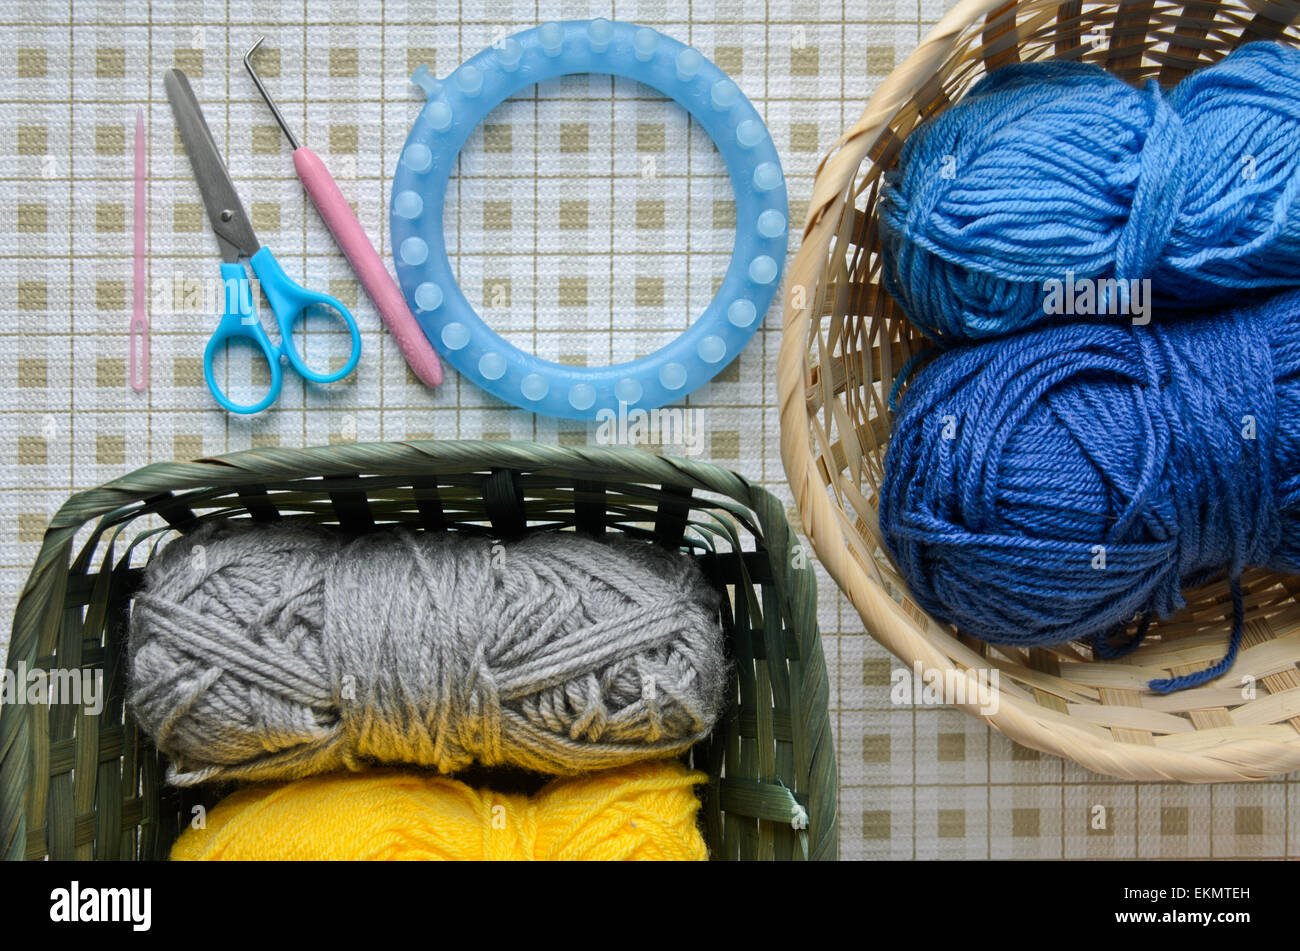 Yarns in baskets and knitting tools Stock Photo